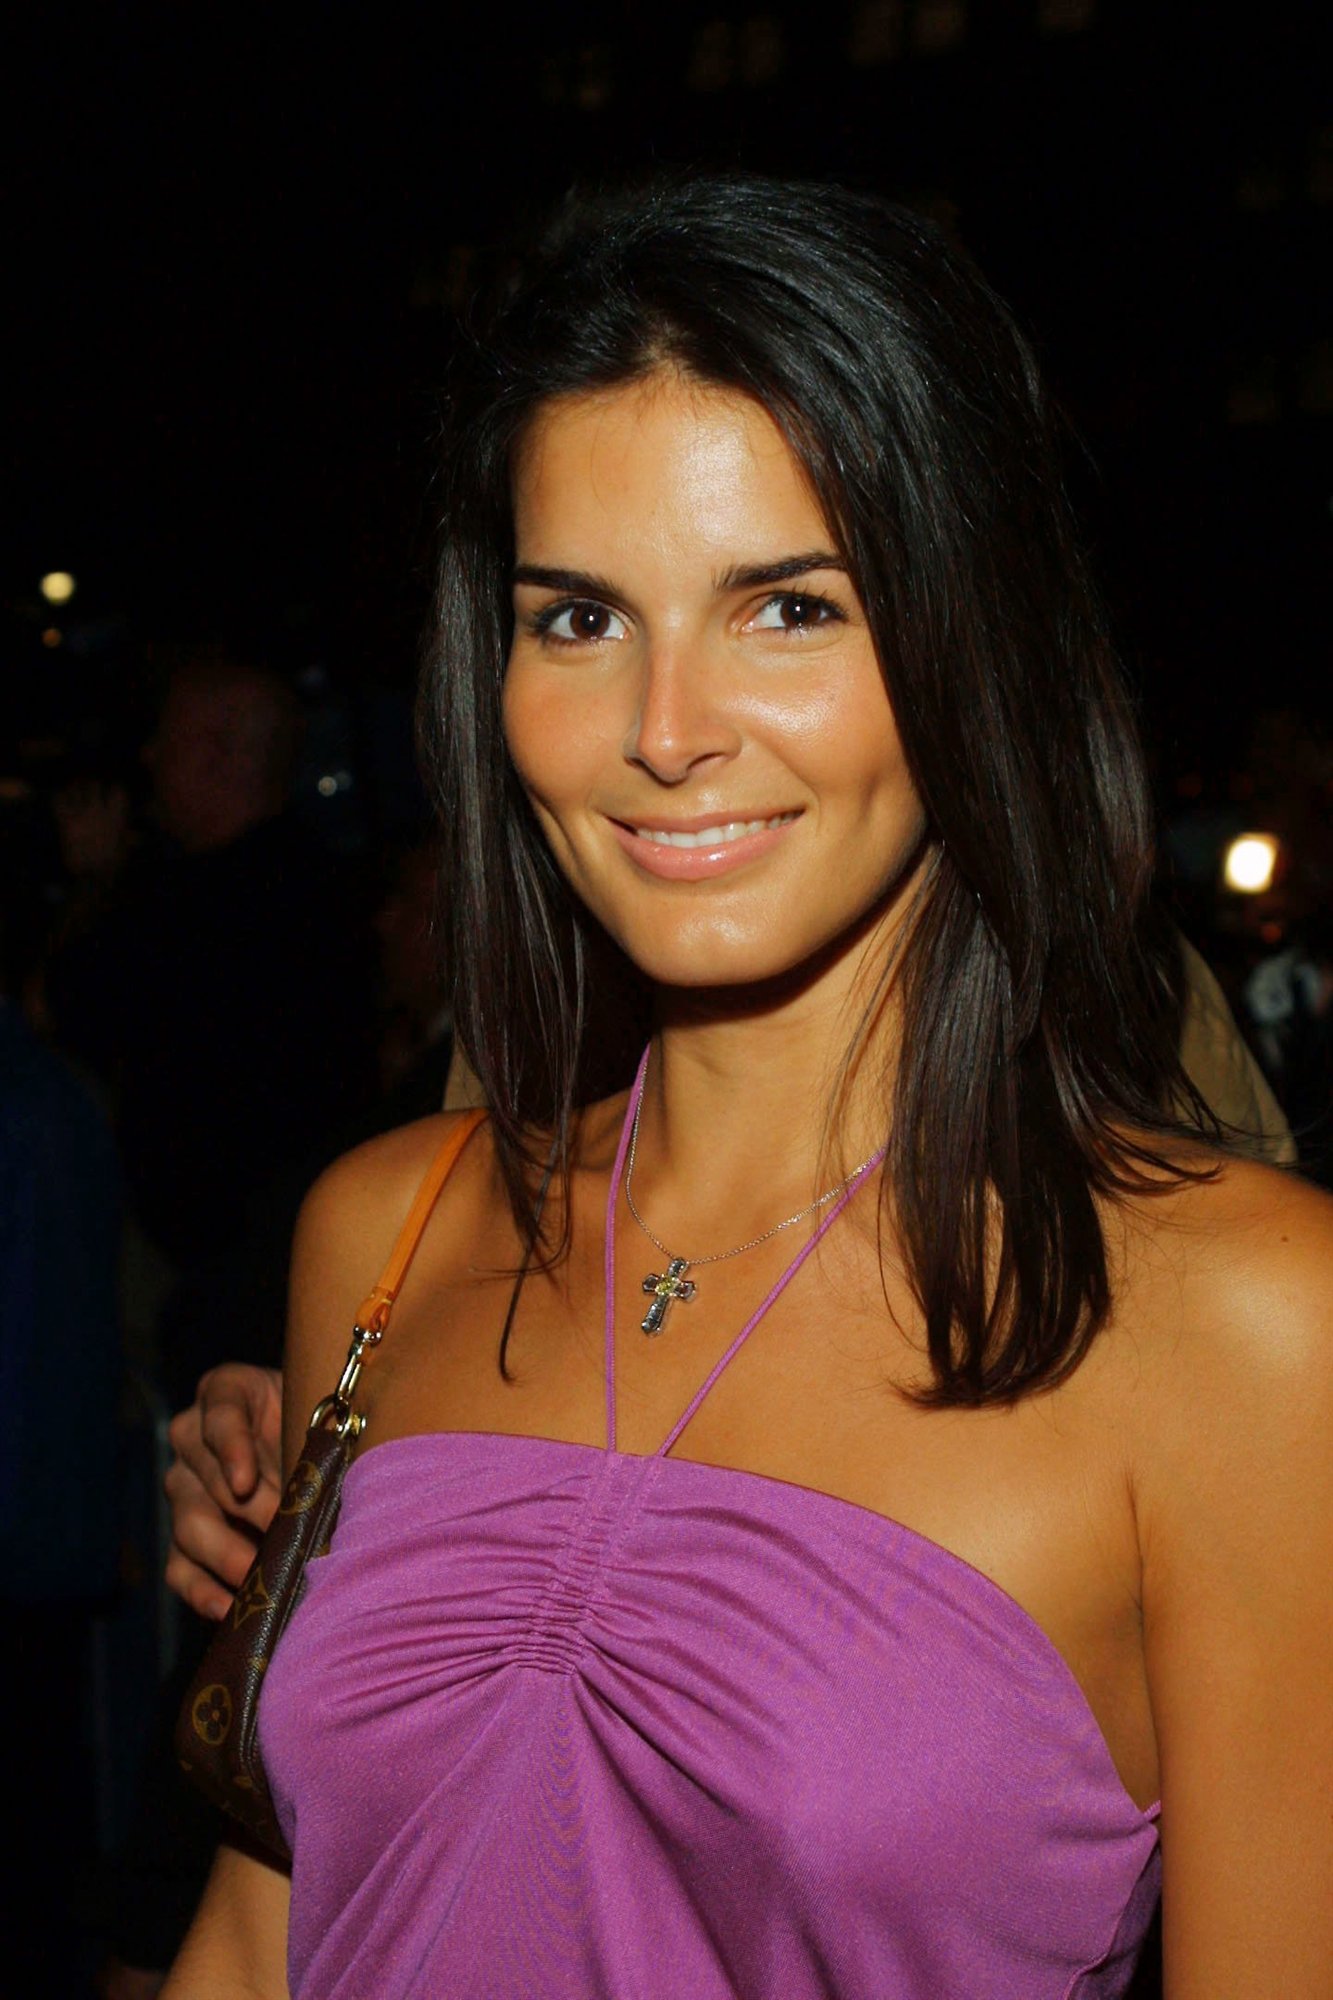 Celebrity Angie Harmon Photos. Pictures, wallpapers, Angie Harmon images (8556)1333 x 2000